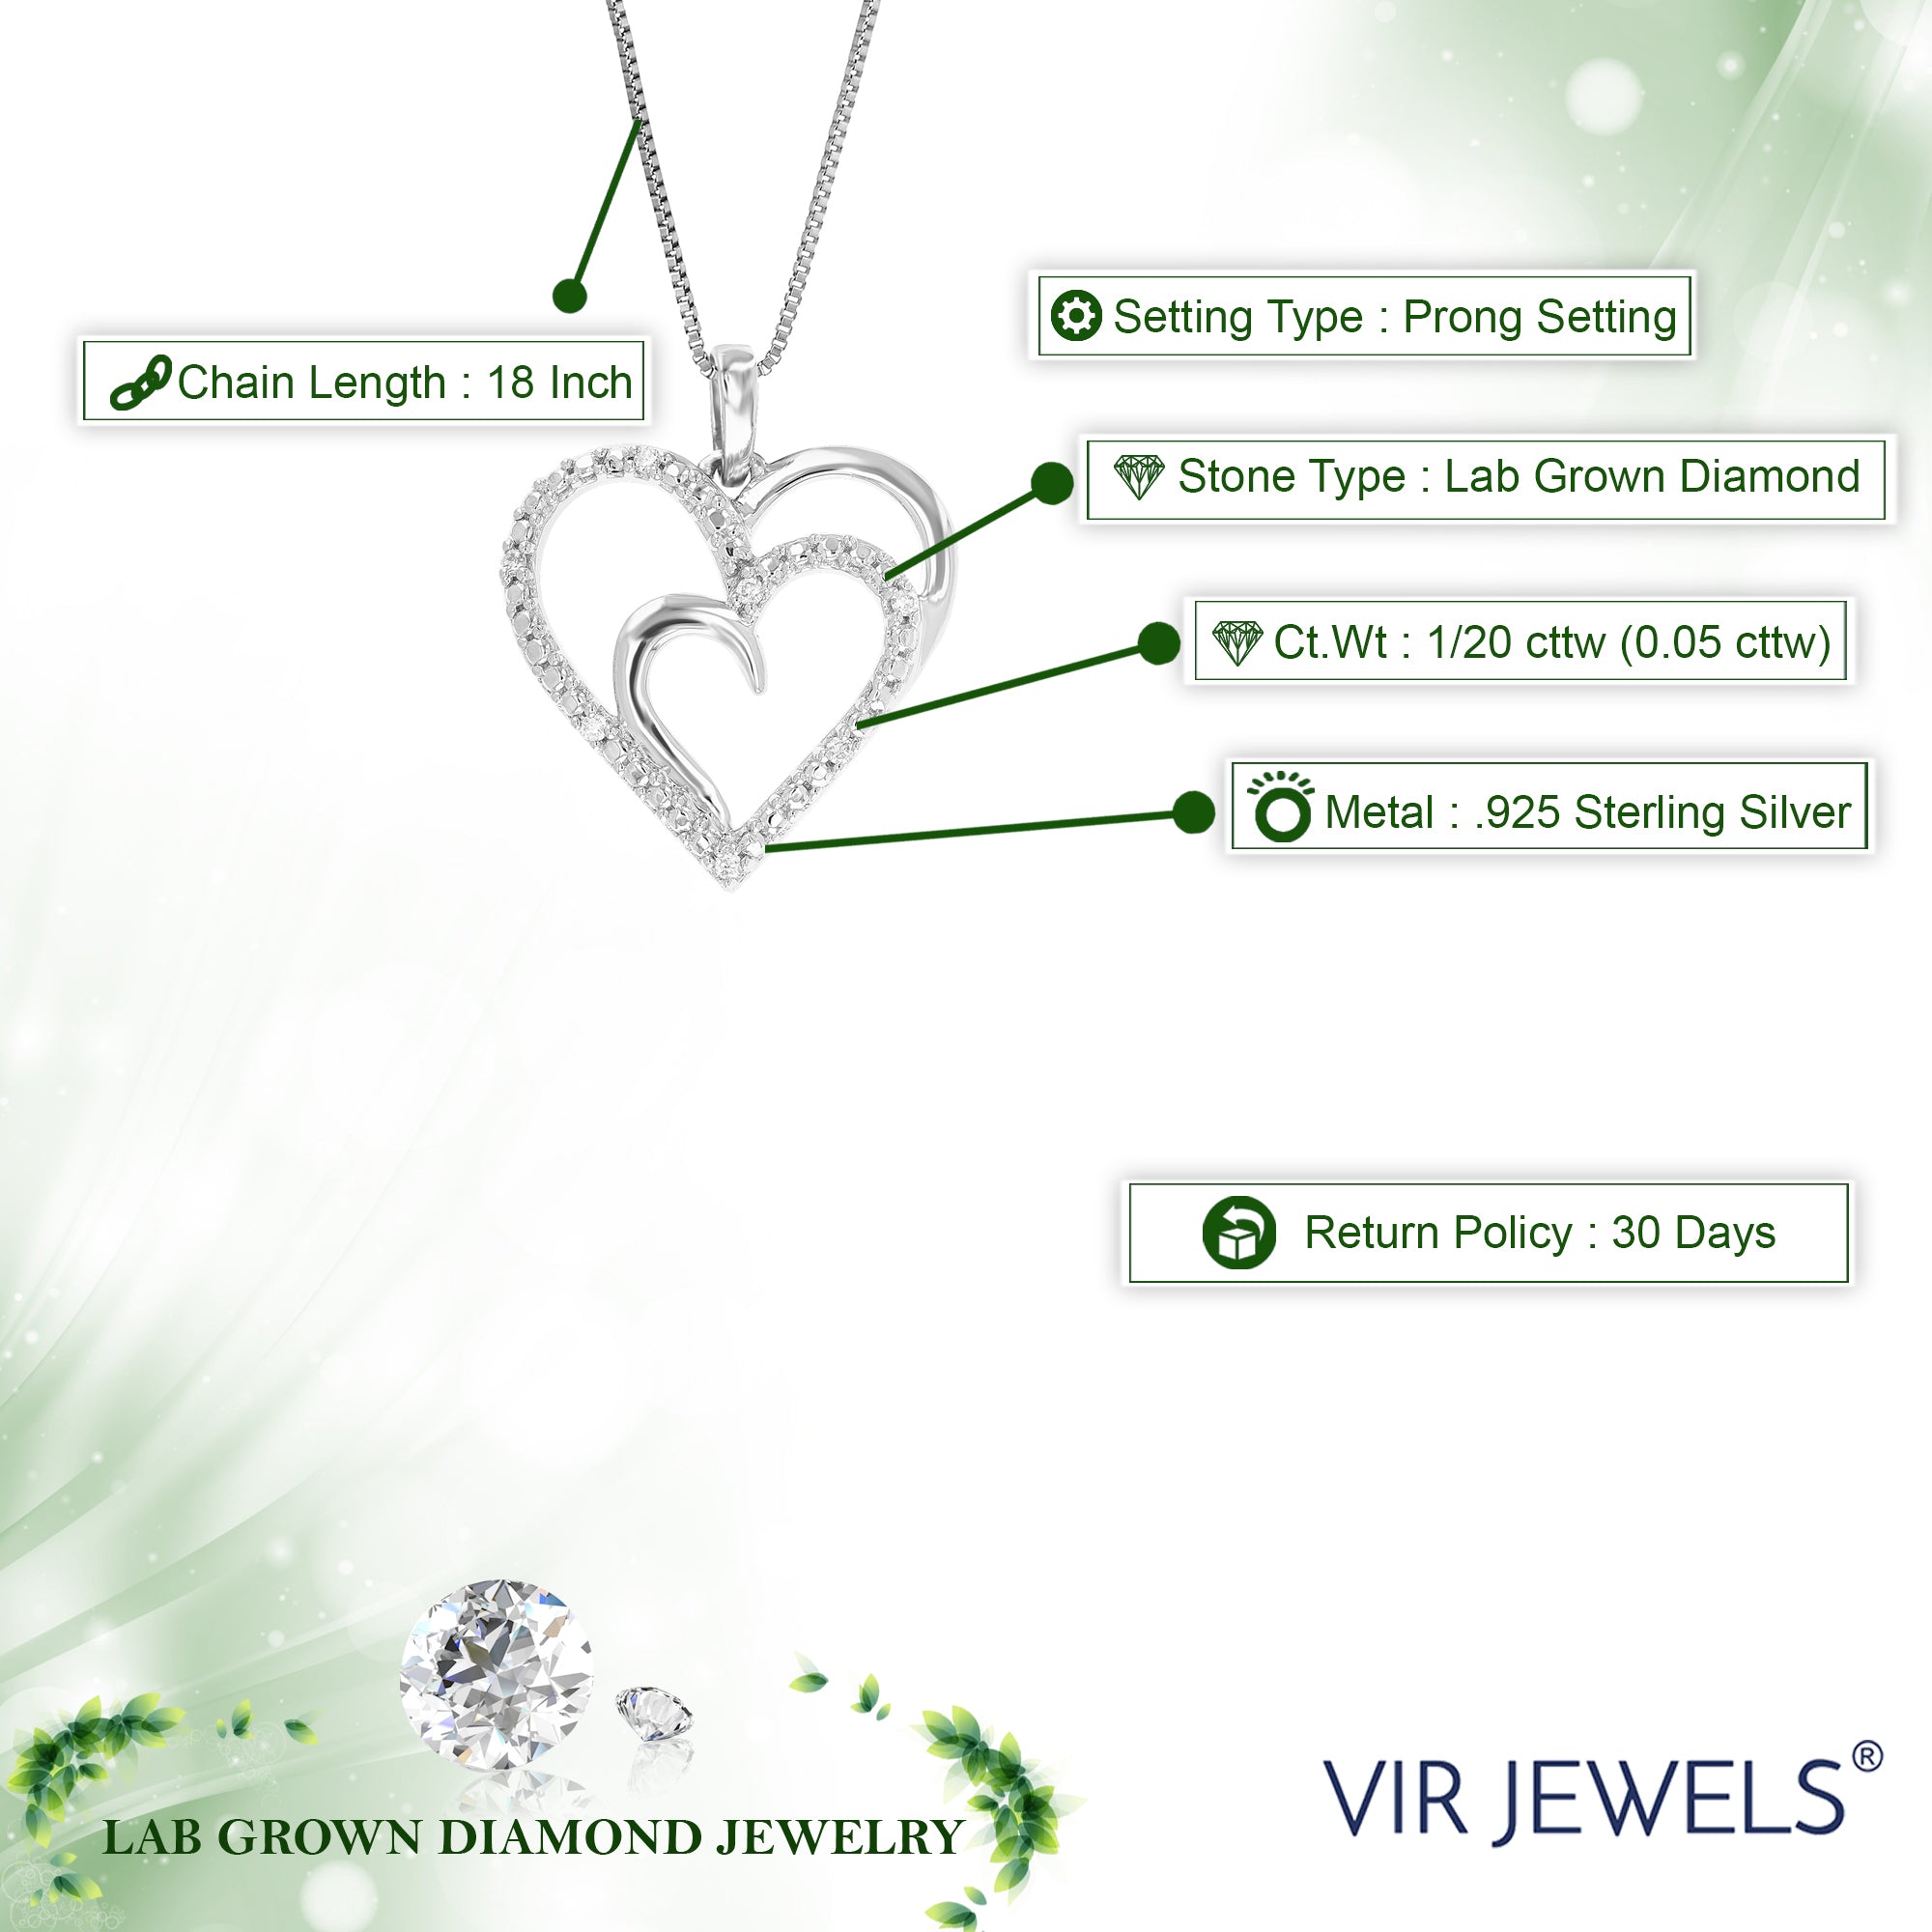 1/20 cttw Diamond Pendant Necklace for Women, Lab Grown Diamond Heart Pendant Necklace in .925 Sterling Silver with Chain, Size 3/4 Inch